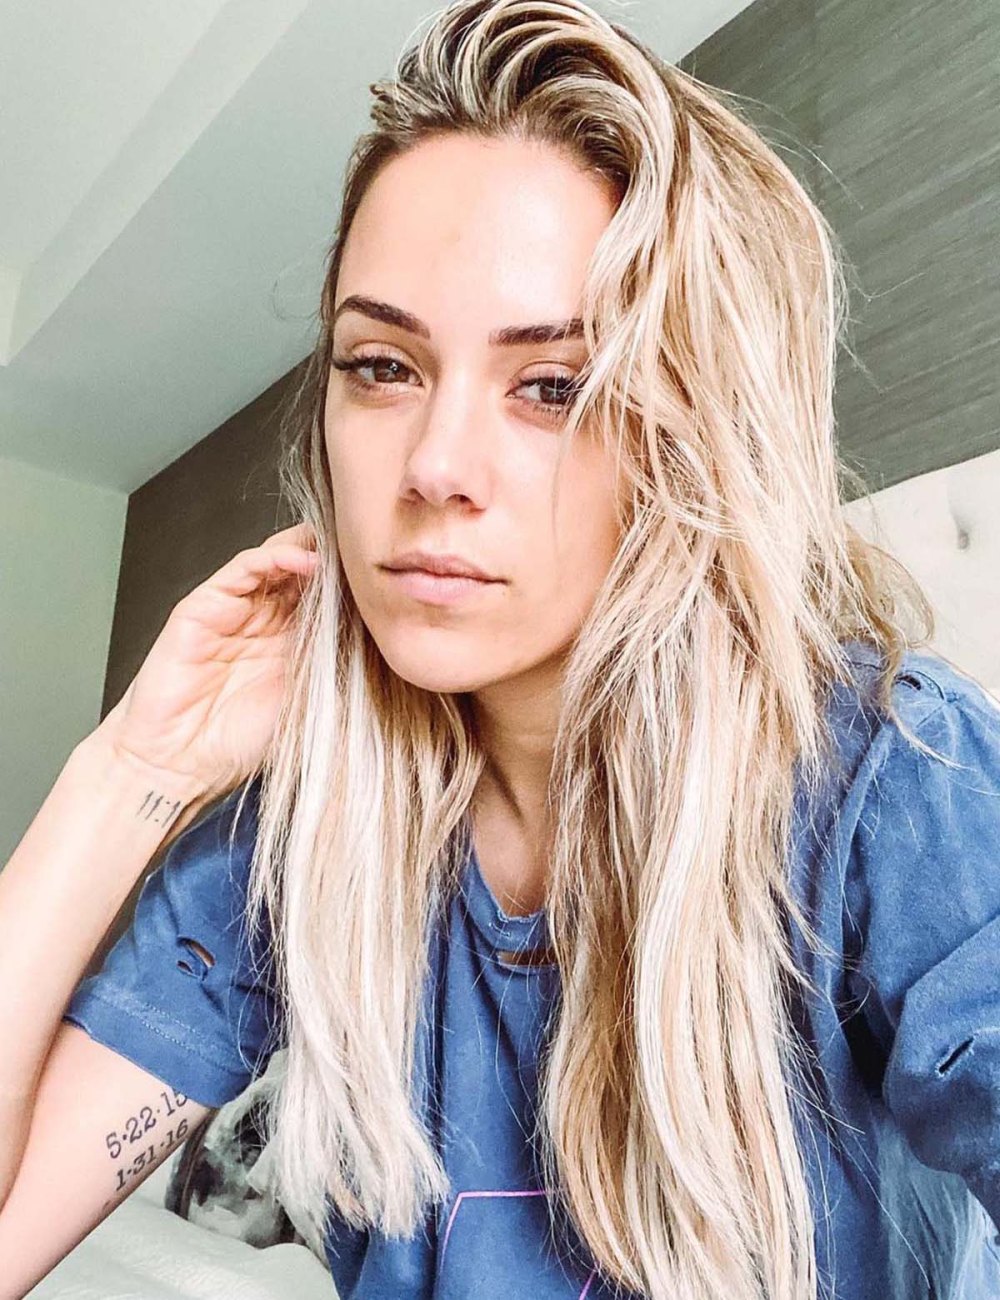 Jana Kramer Theres Still Hate Hurt With Mike Caussin Amid Divorce